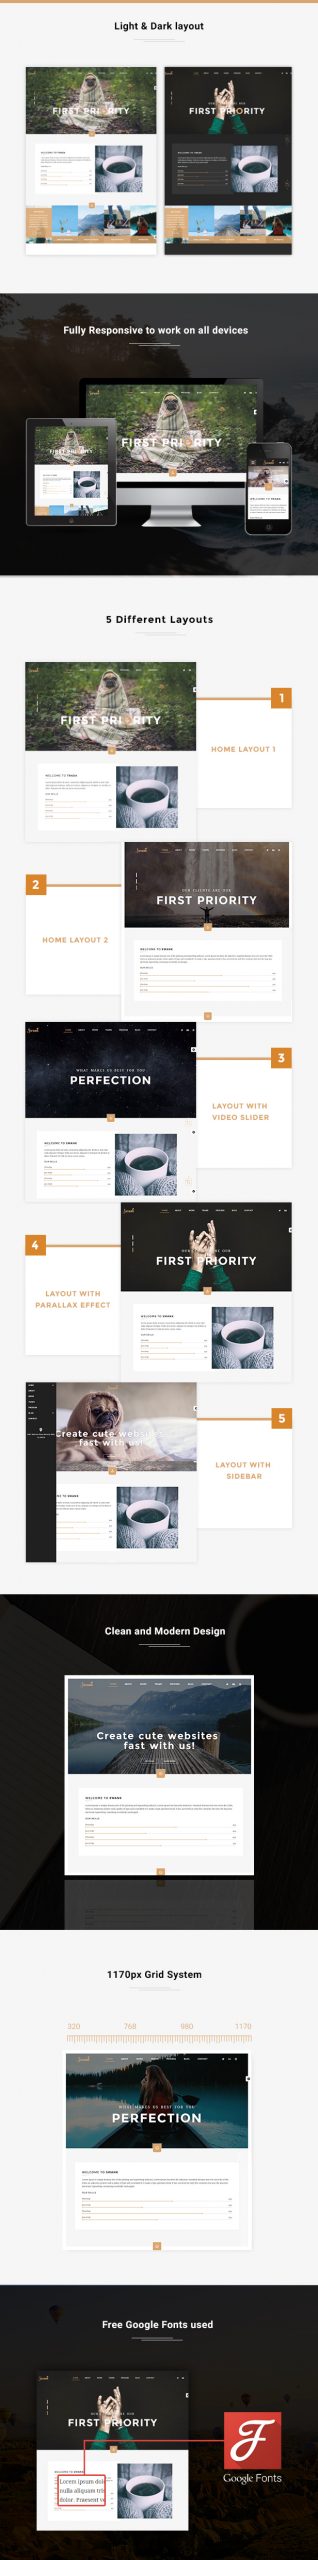 Swank - Creative One Page with Blog template - 1